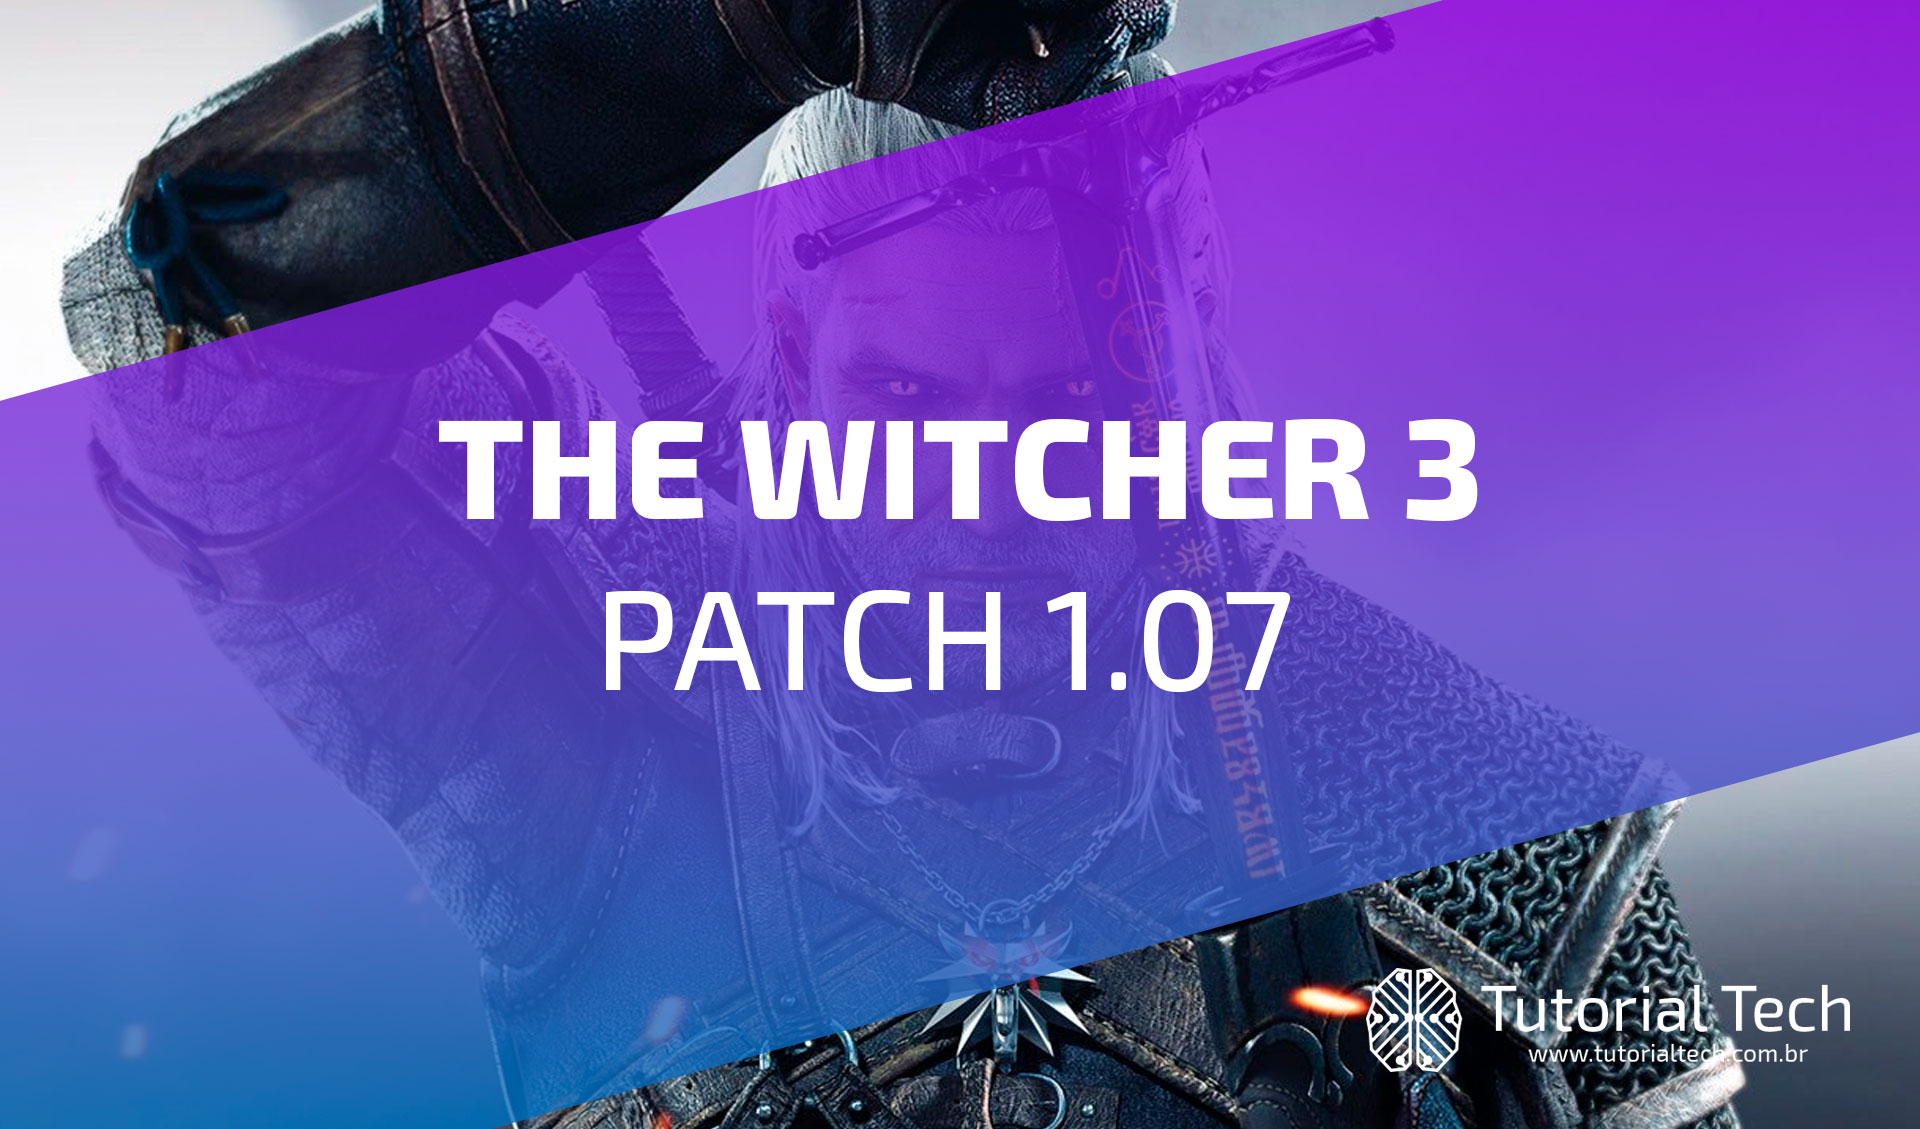  DOWNLOAD The Witcher 3 Patch 1.07 Para PC - Tutorial Tech